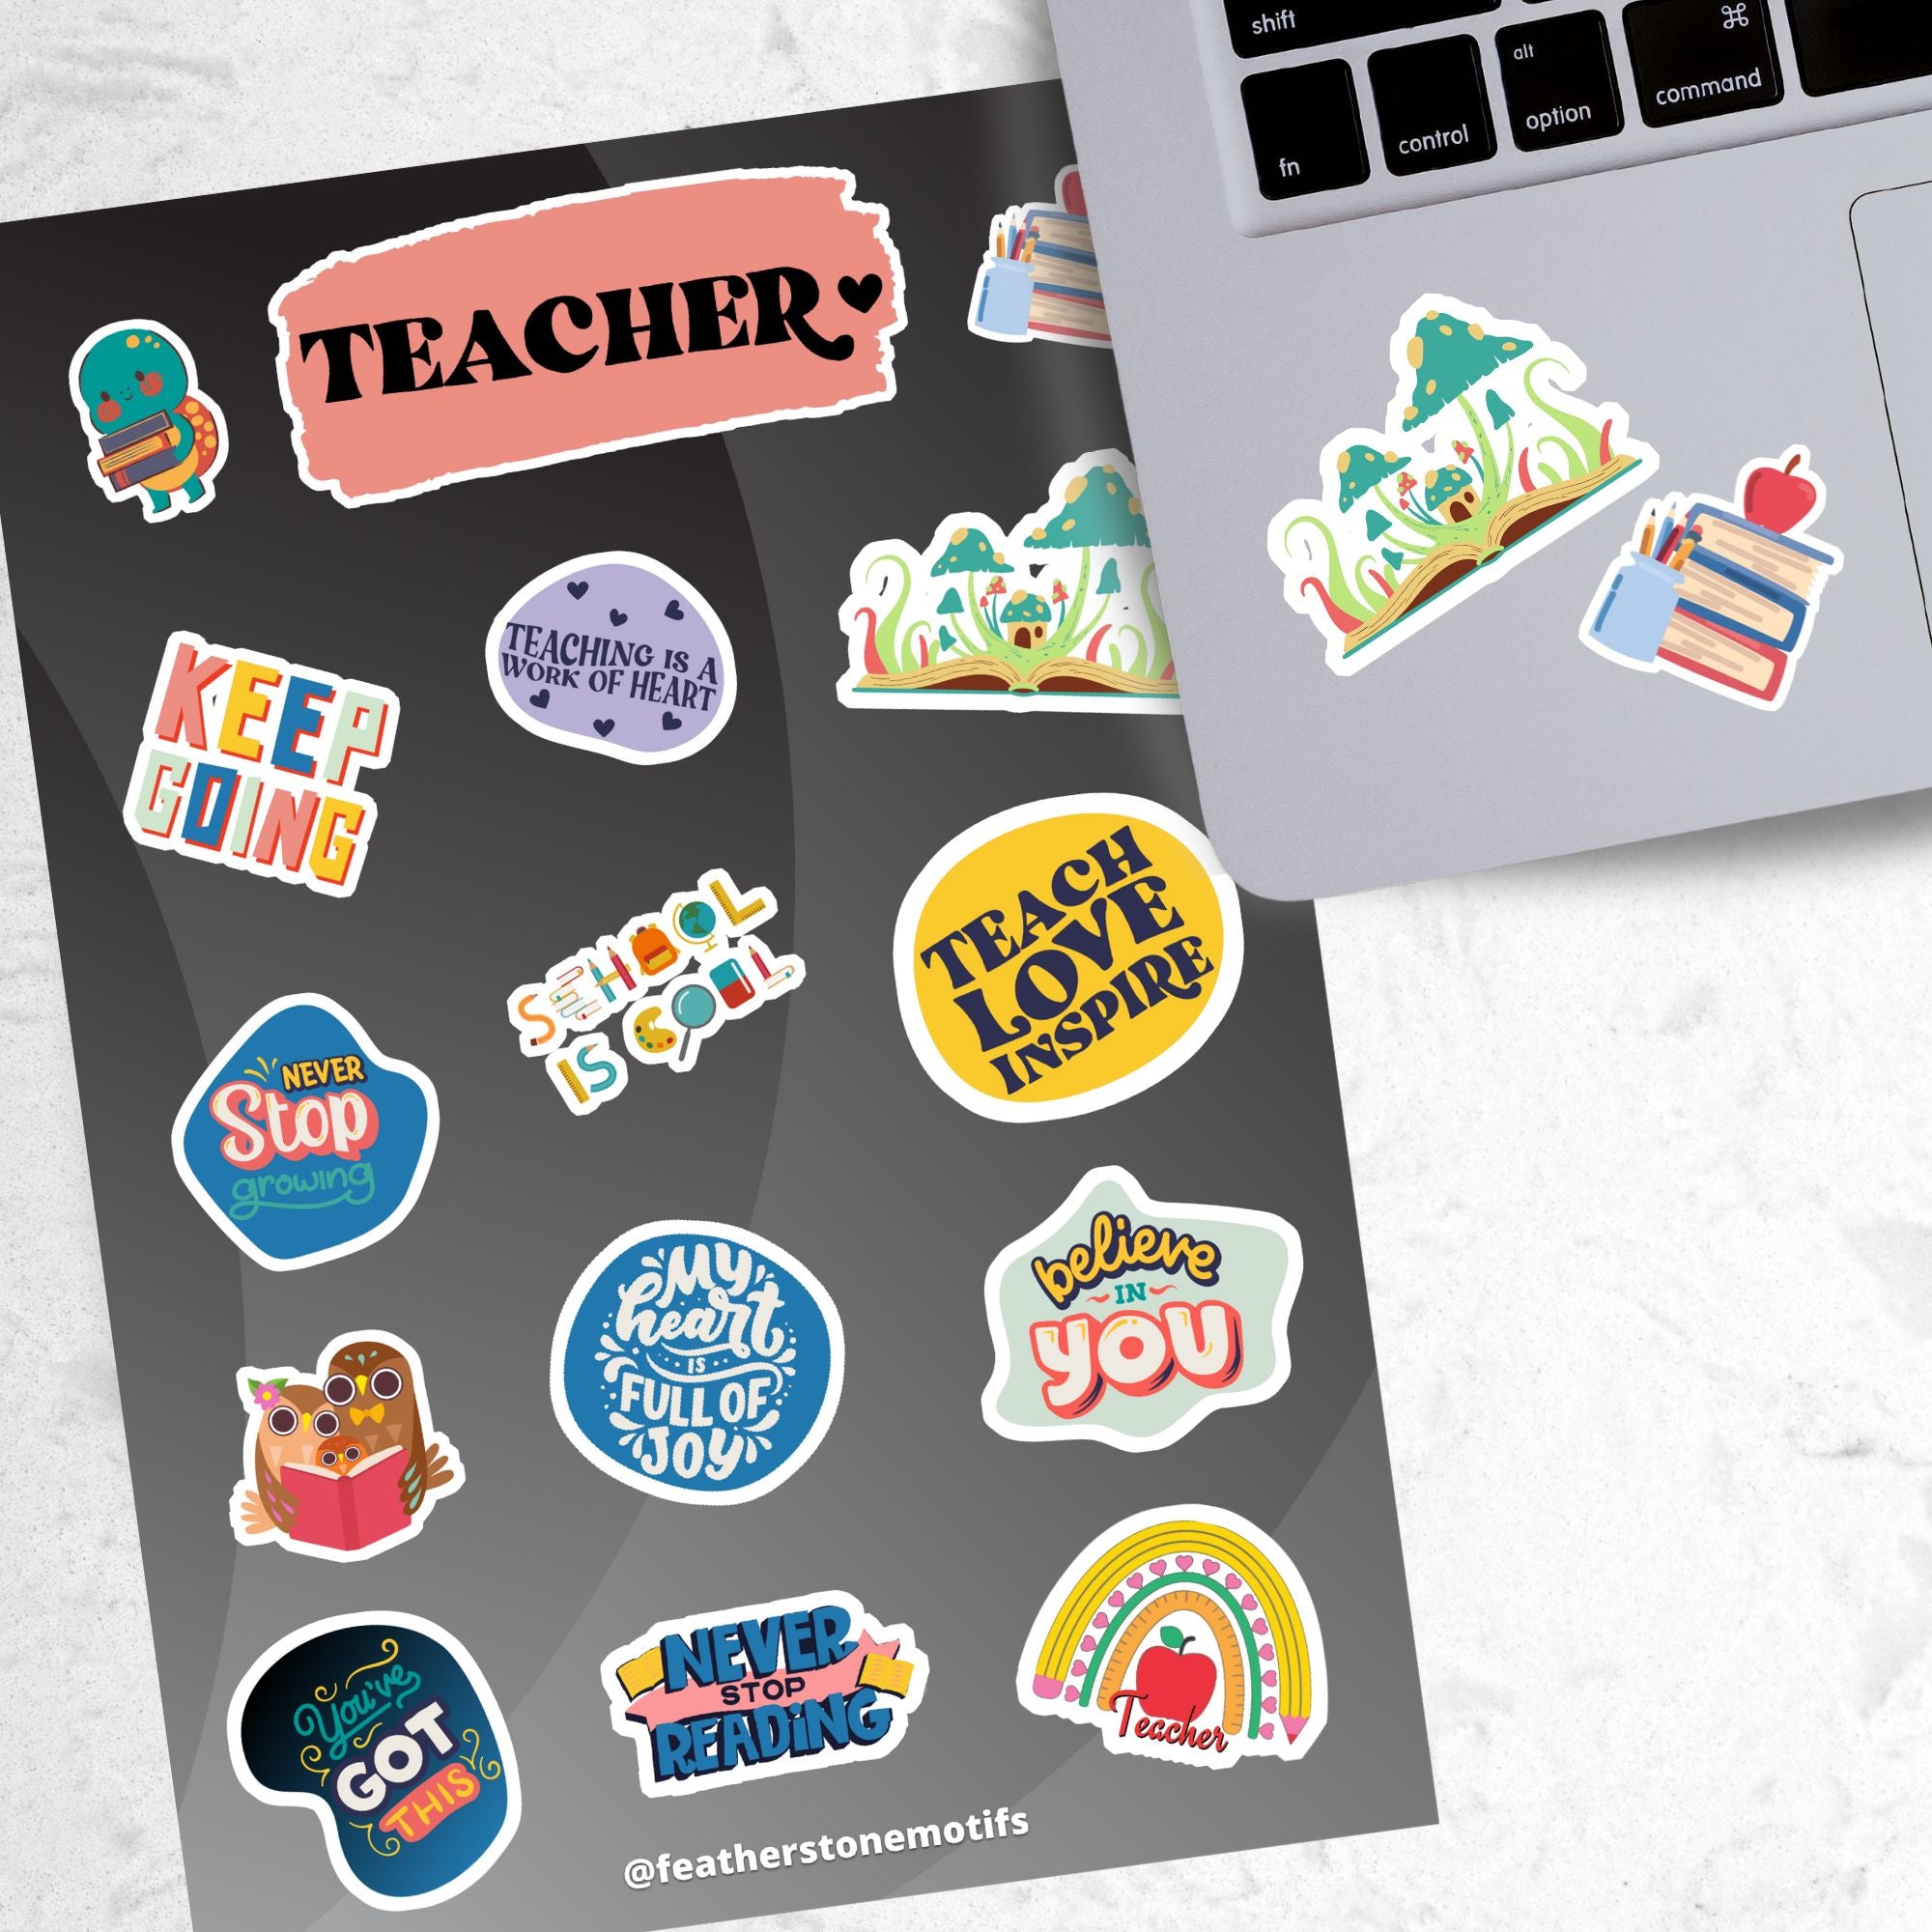 This sticker sheet is great for educators to give to students, or for students to give as a gift to their teacher/educator! The sticker sheet is filled with sticker images like books, and inspirational sayings like "Keep Going", "Never Stop Reading", and "School is Cool". This image shows the sticker sheet next to an open laptop with a sticker of an open book with plants and mushrooms growing out of it, and a sticker of a stack of books with an apple on top, applied below the keyboard.